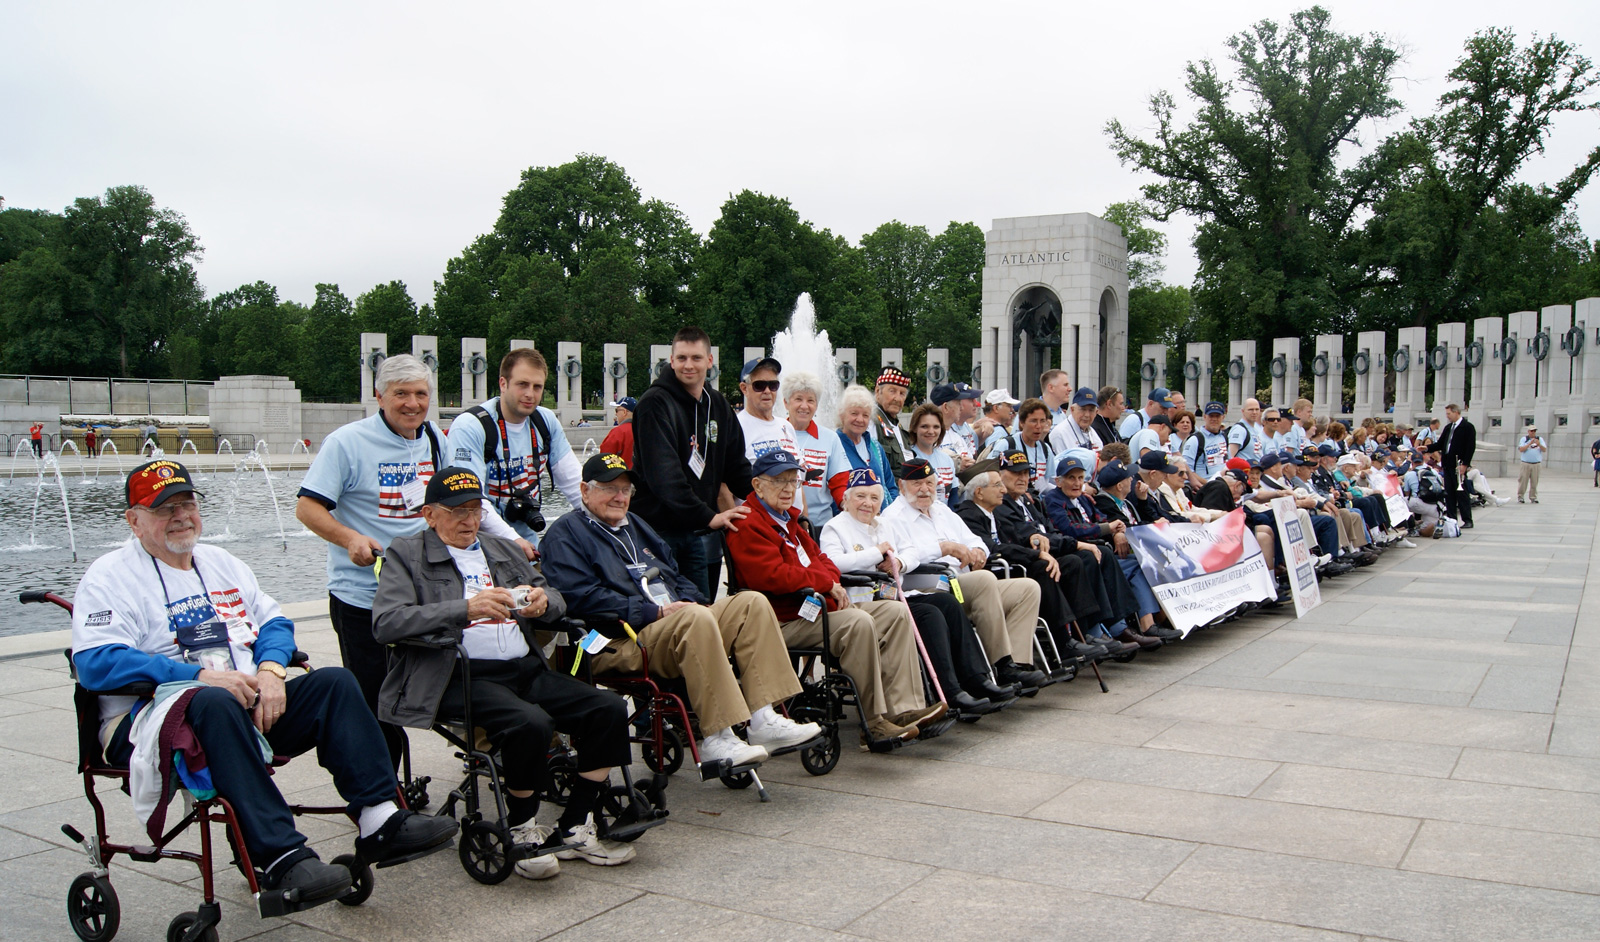 Honor Flight New England at the World War II Memorial with MetaVR in Washington D.C. on May 19, 2013. (Copyright Honor Flight New England.)